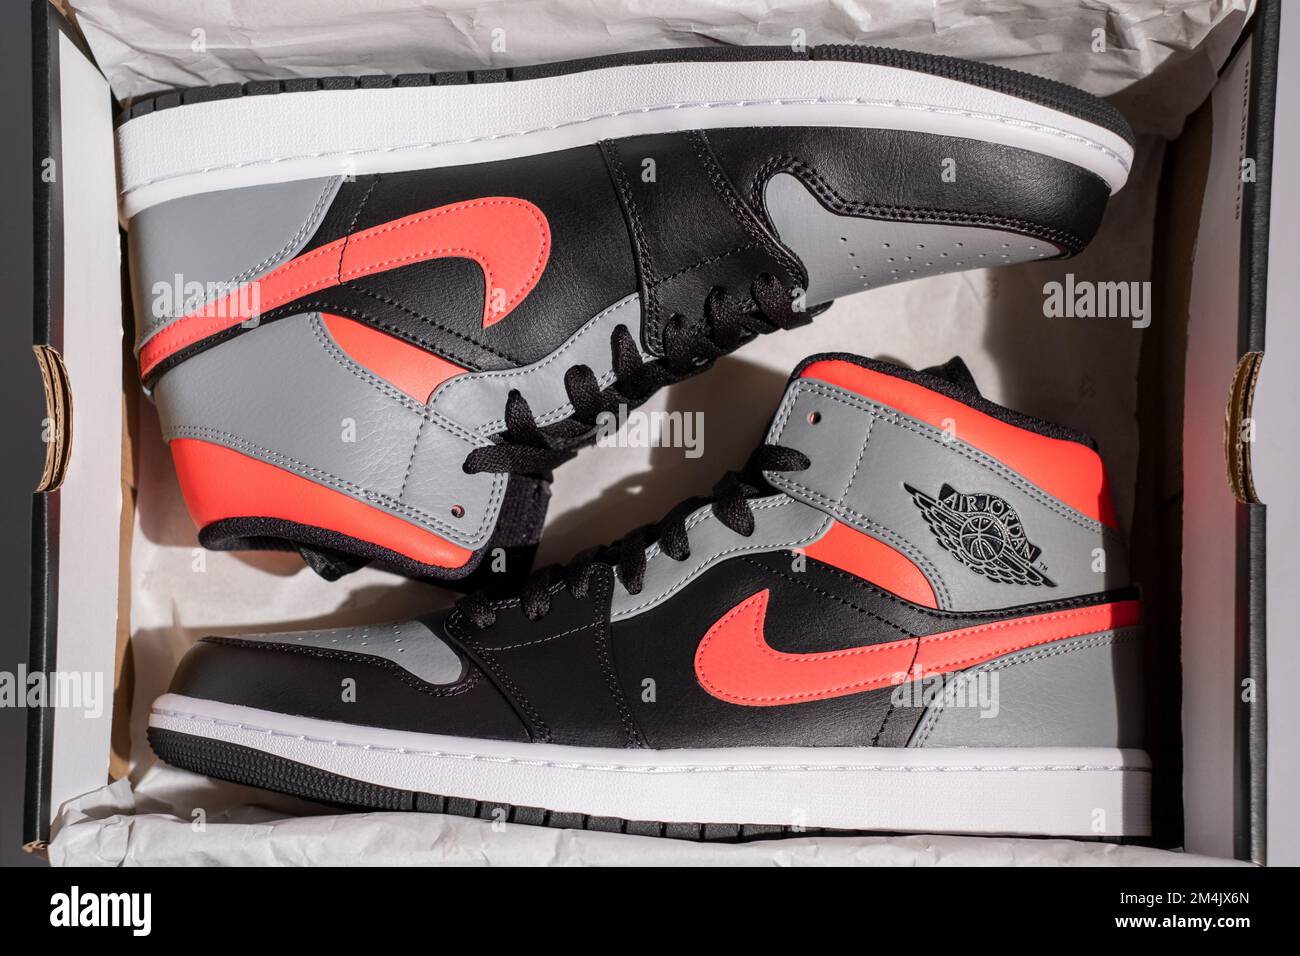 Prague, - 16 May 2021: Unboxing a package from Nike arrived Jordan model 1 Mid custom HOT PUNCH Pink Shadow. custom sneaker top view. Stock Photo - Alamy